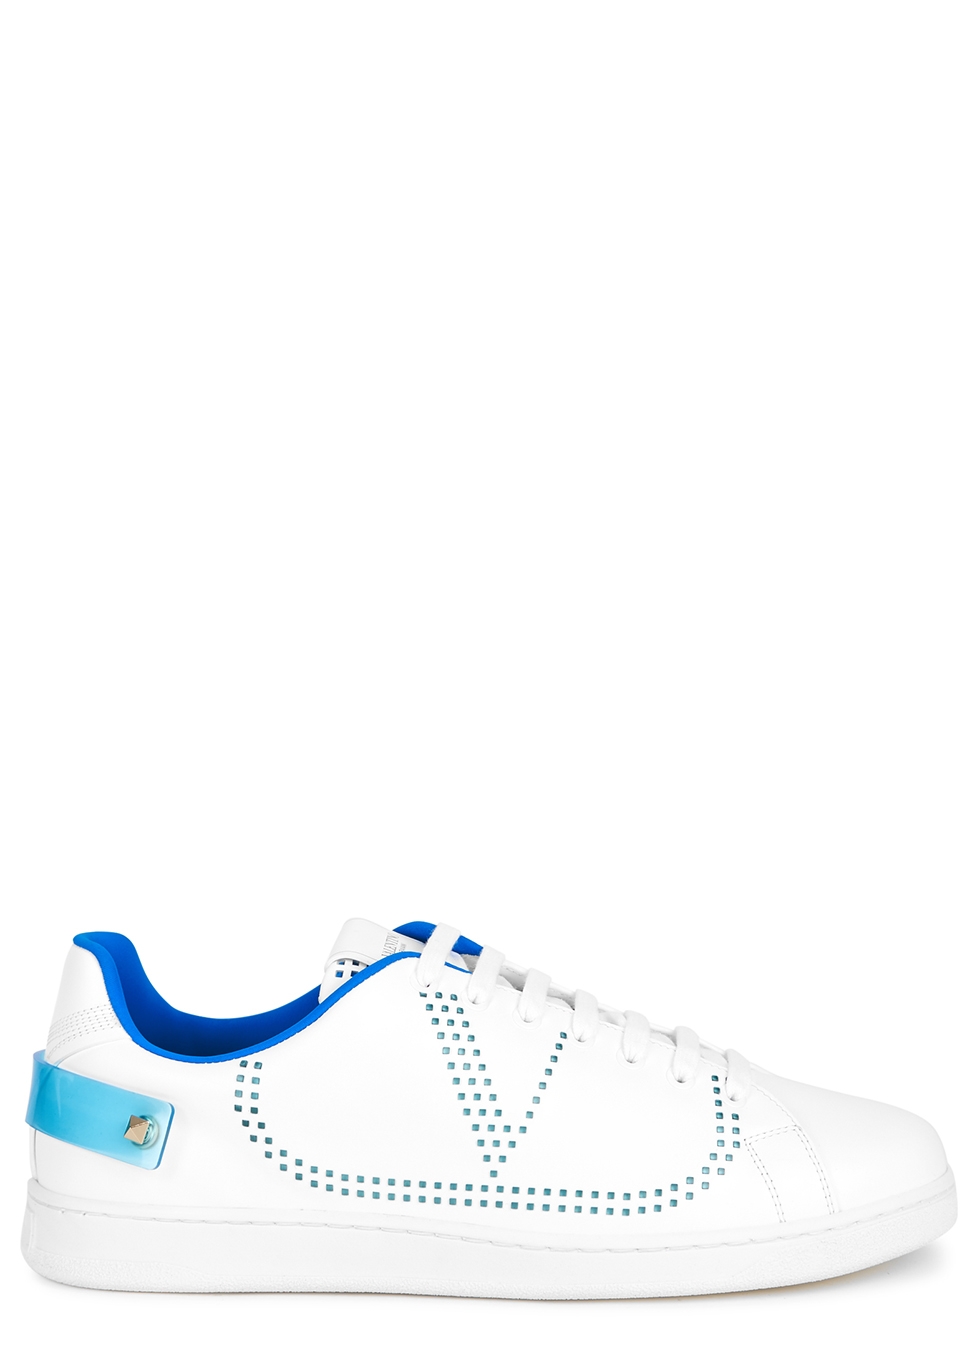 white perforated leather sneakers